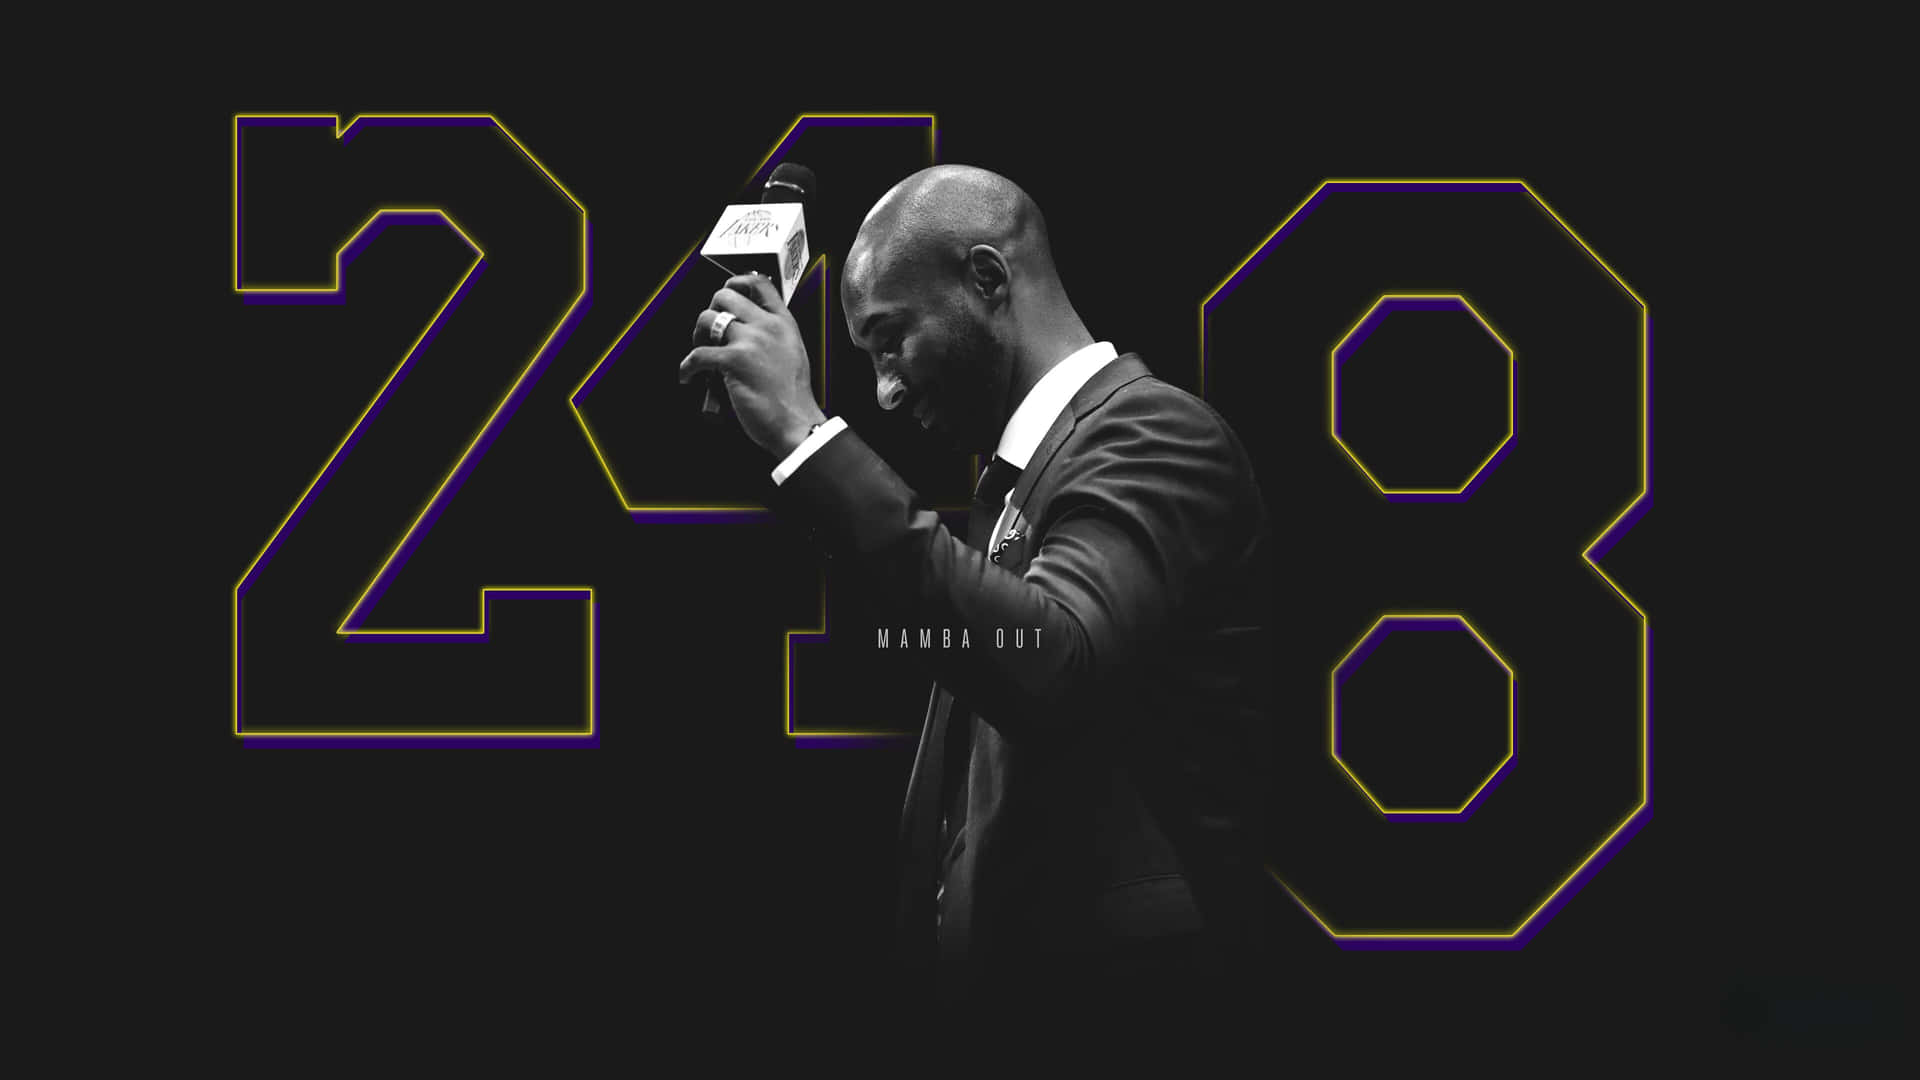 Achieve your goals with Mamba Mentality" Wallpaper